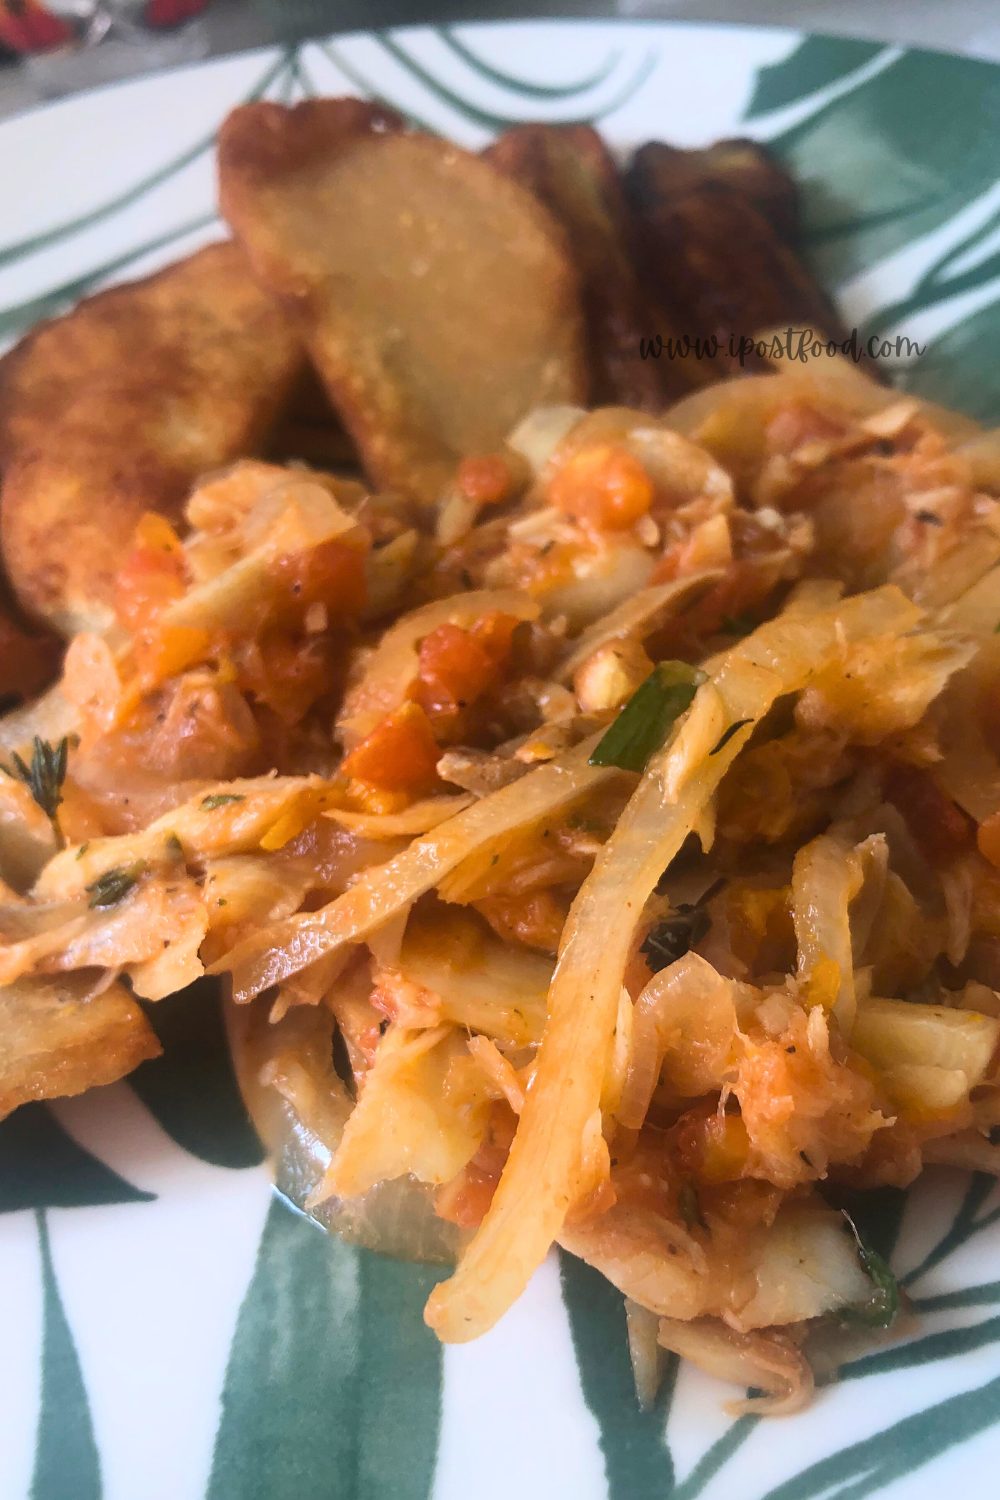 saltfish cooked and served with fried over dumpling